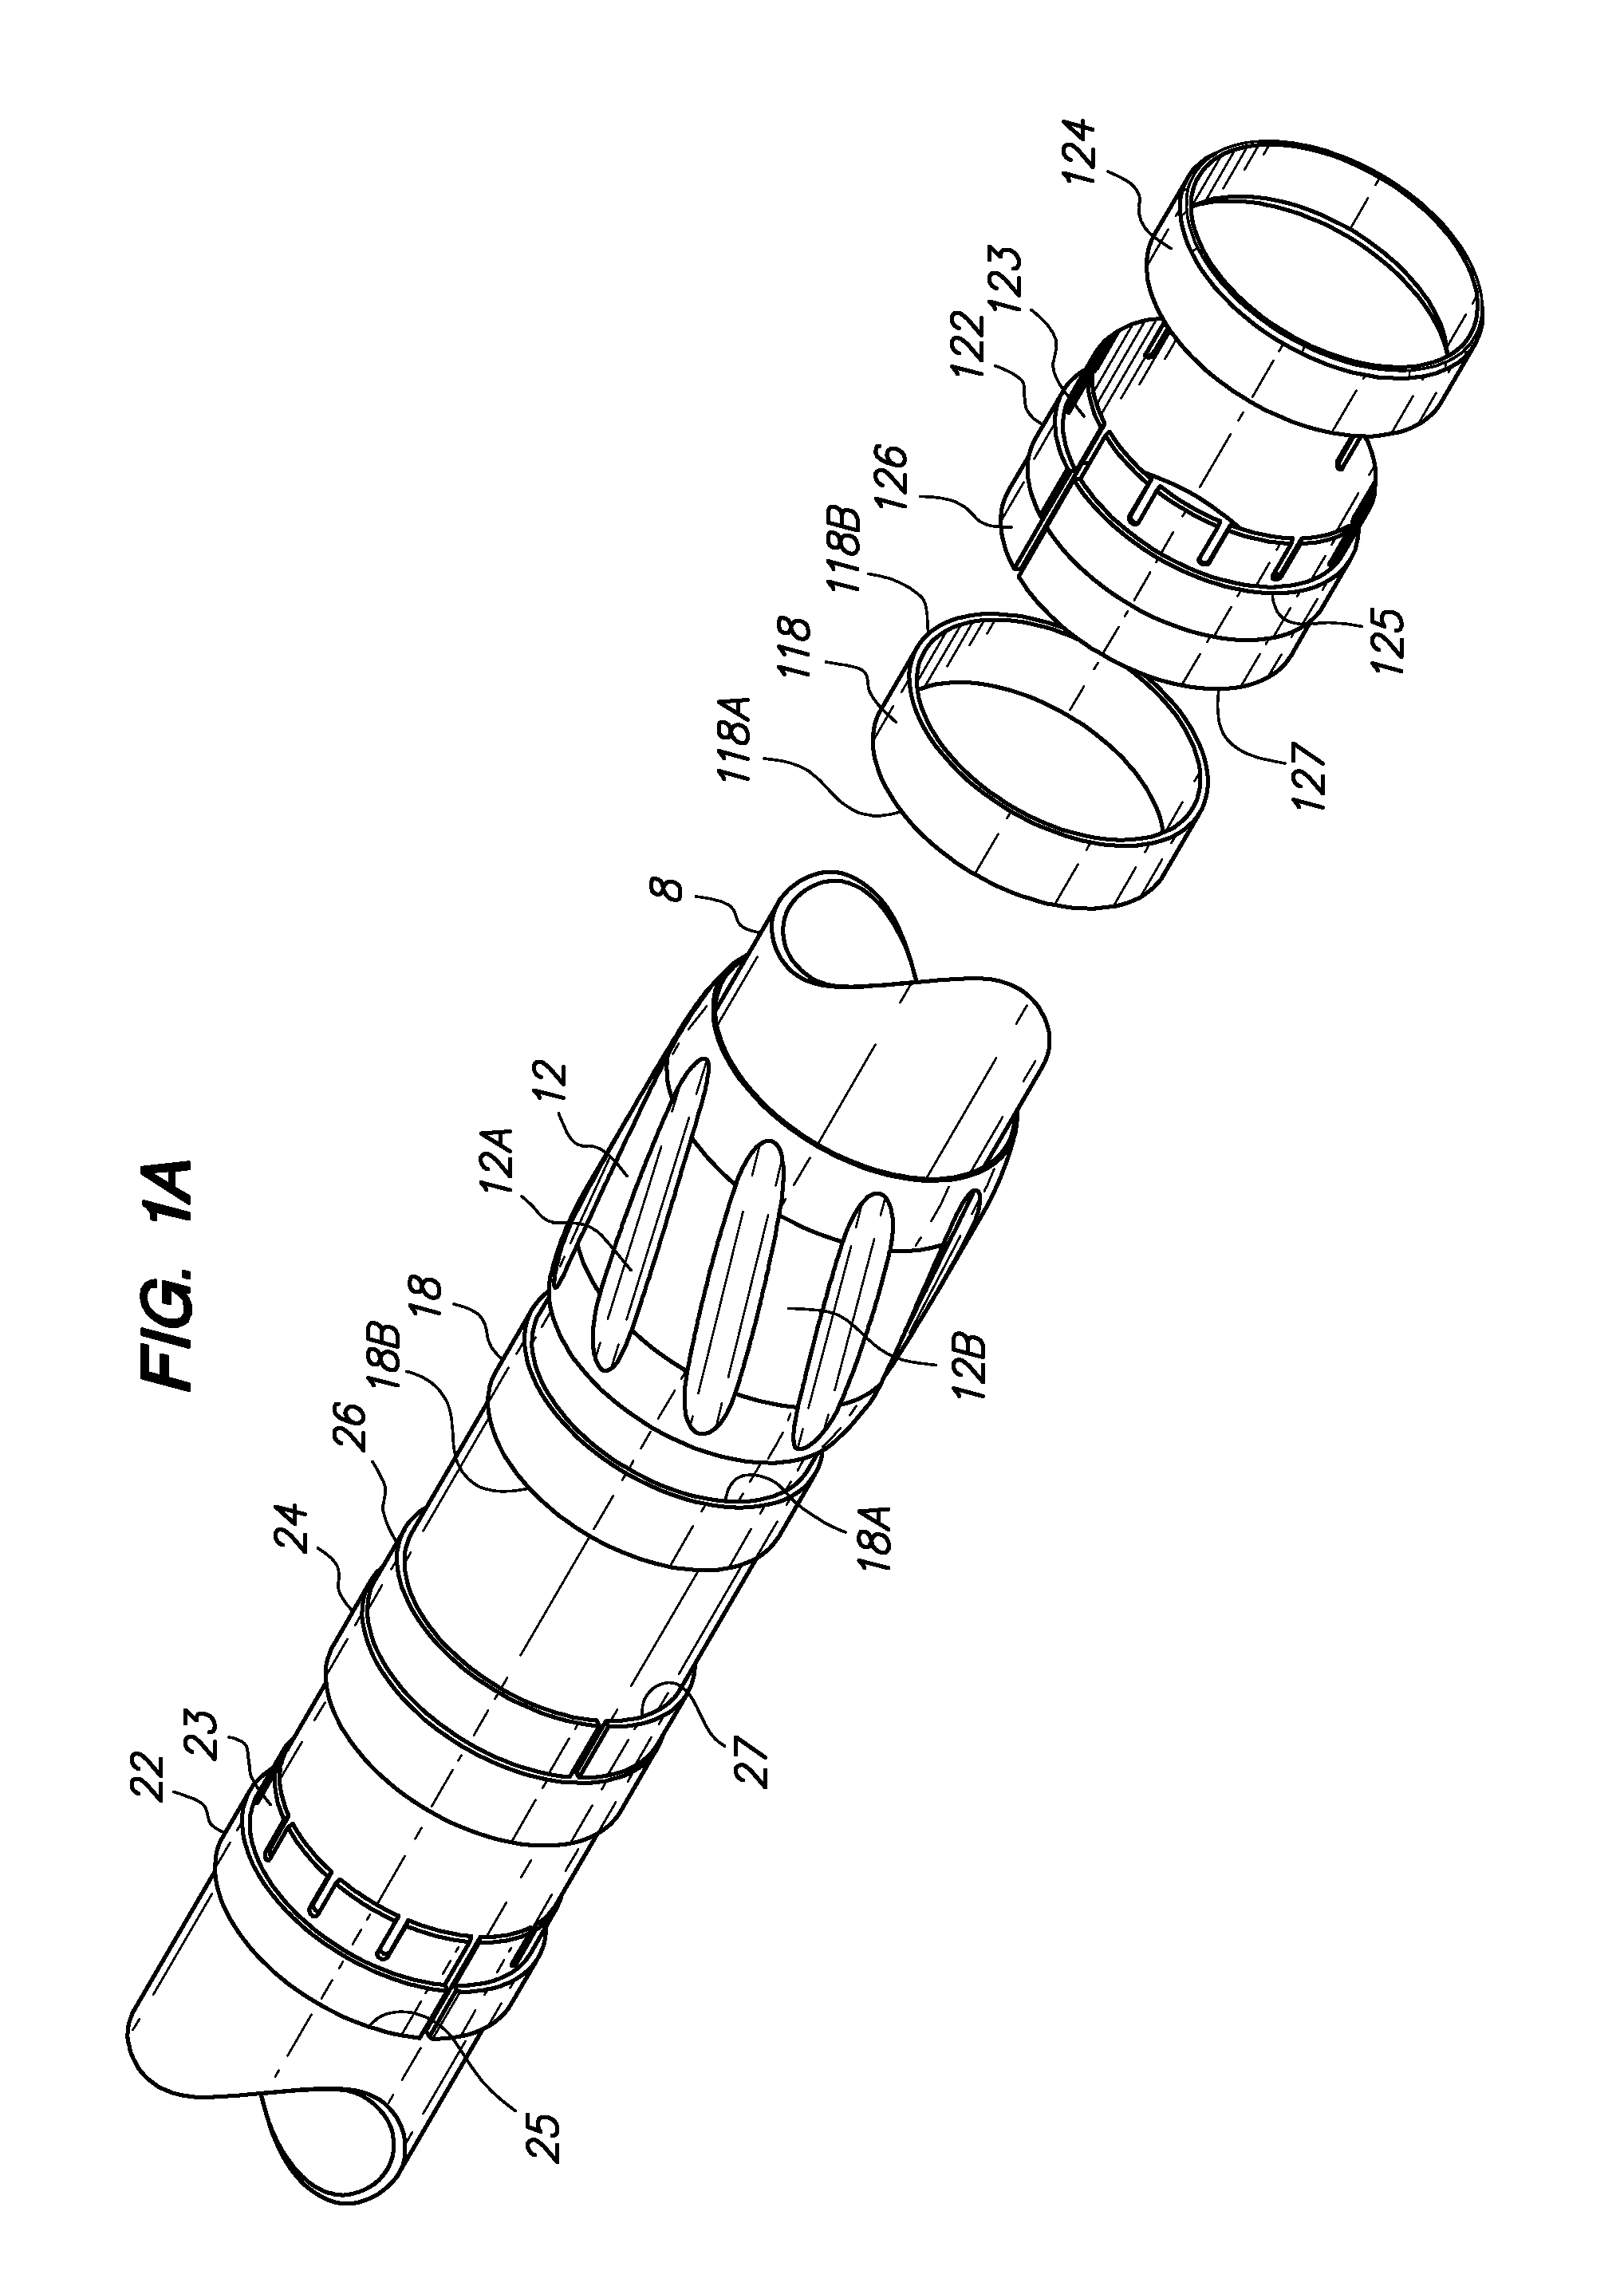 Friction reducing wear band and method of coupling a wear band to a tubular